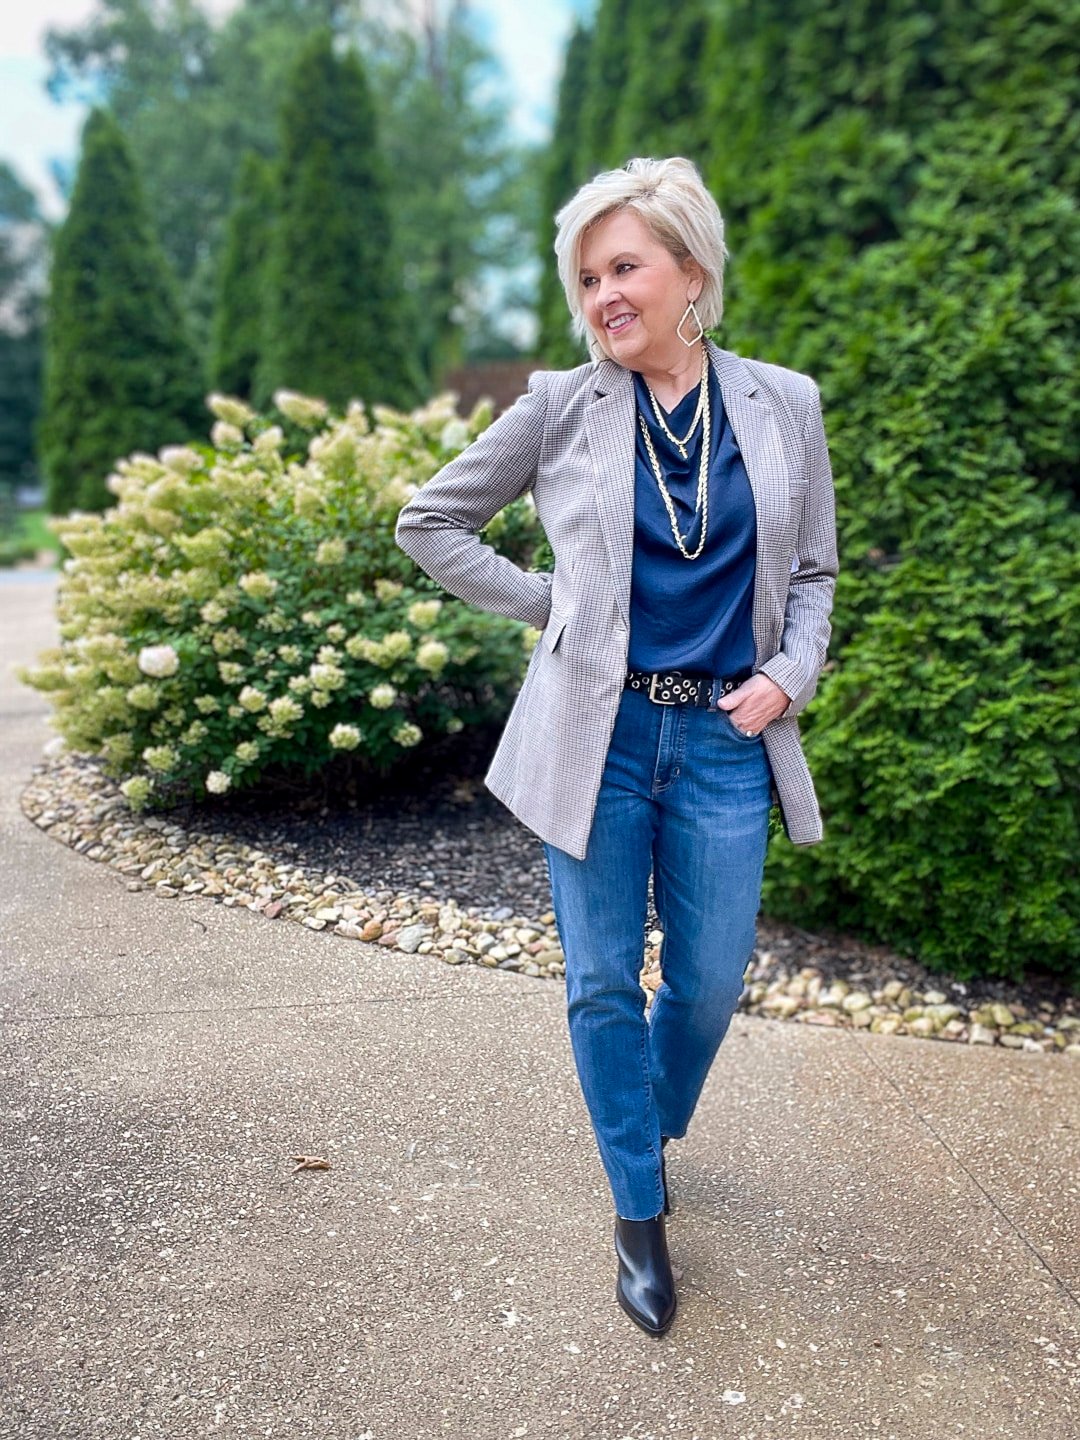 Over 40 Fashion Blogger, Tania Stephens is styling jeans for a western style4